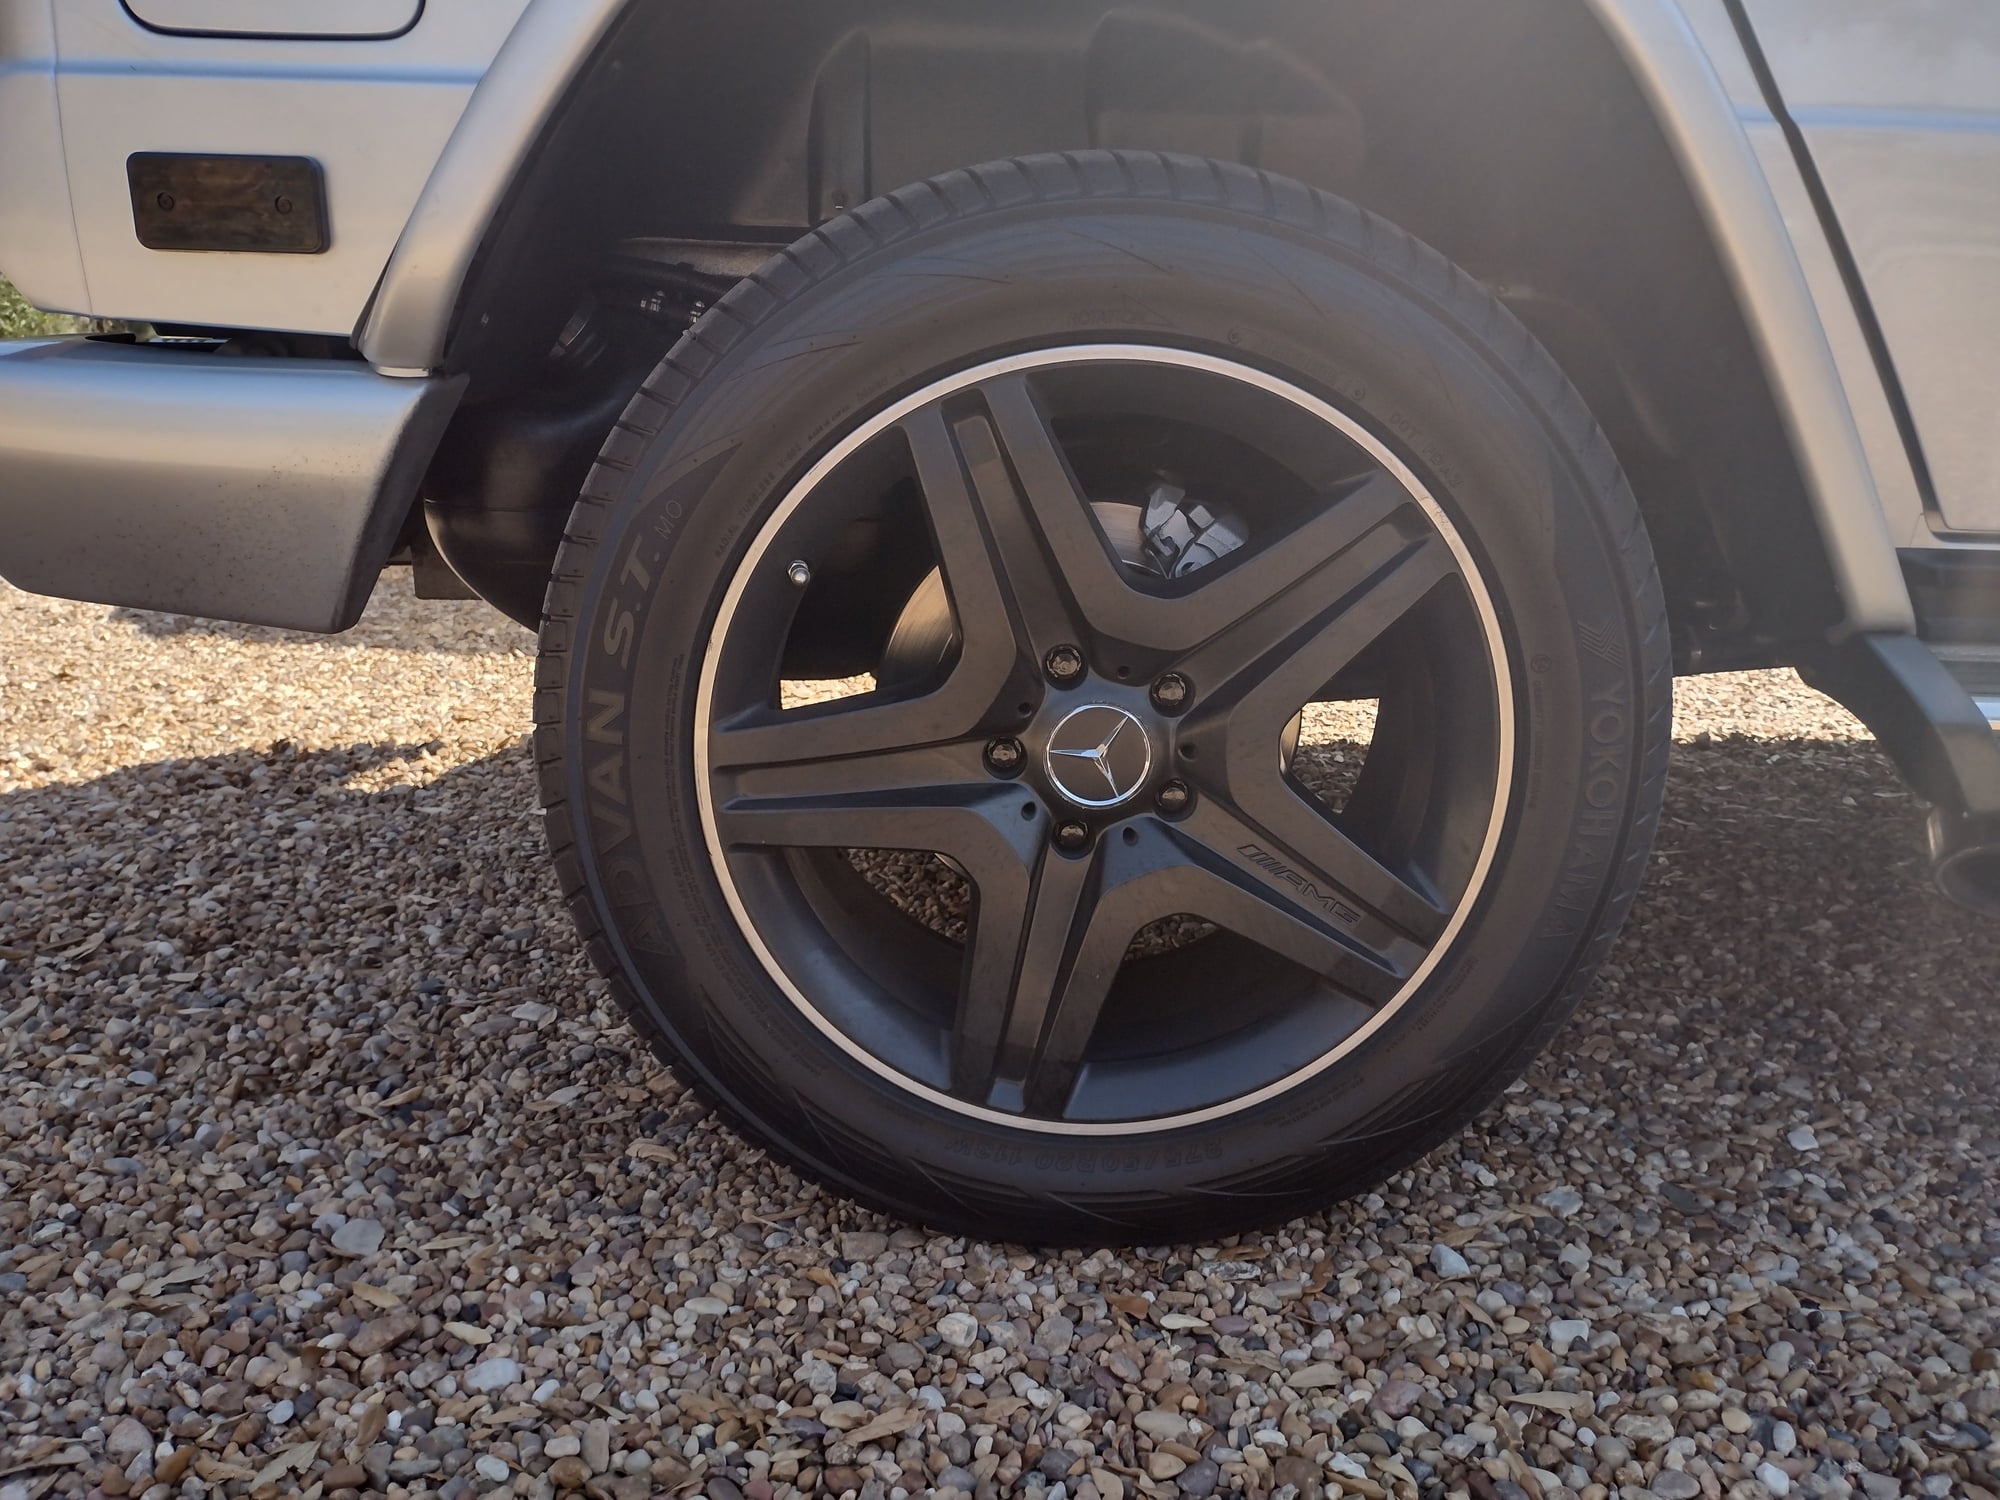 Wheels and Tires/Axles - G63 OME black 20" rims (full set plus spare) - Used - All Years Mercedes-Benz G-Class - Houston, TX 77406, United States